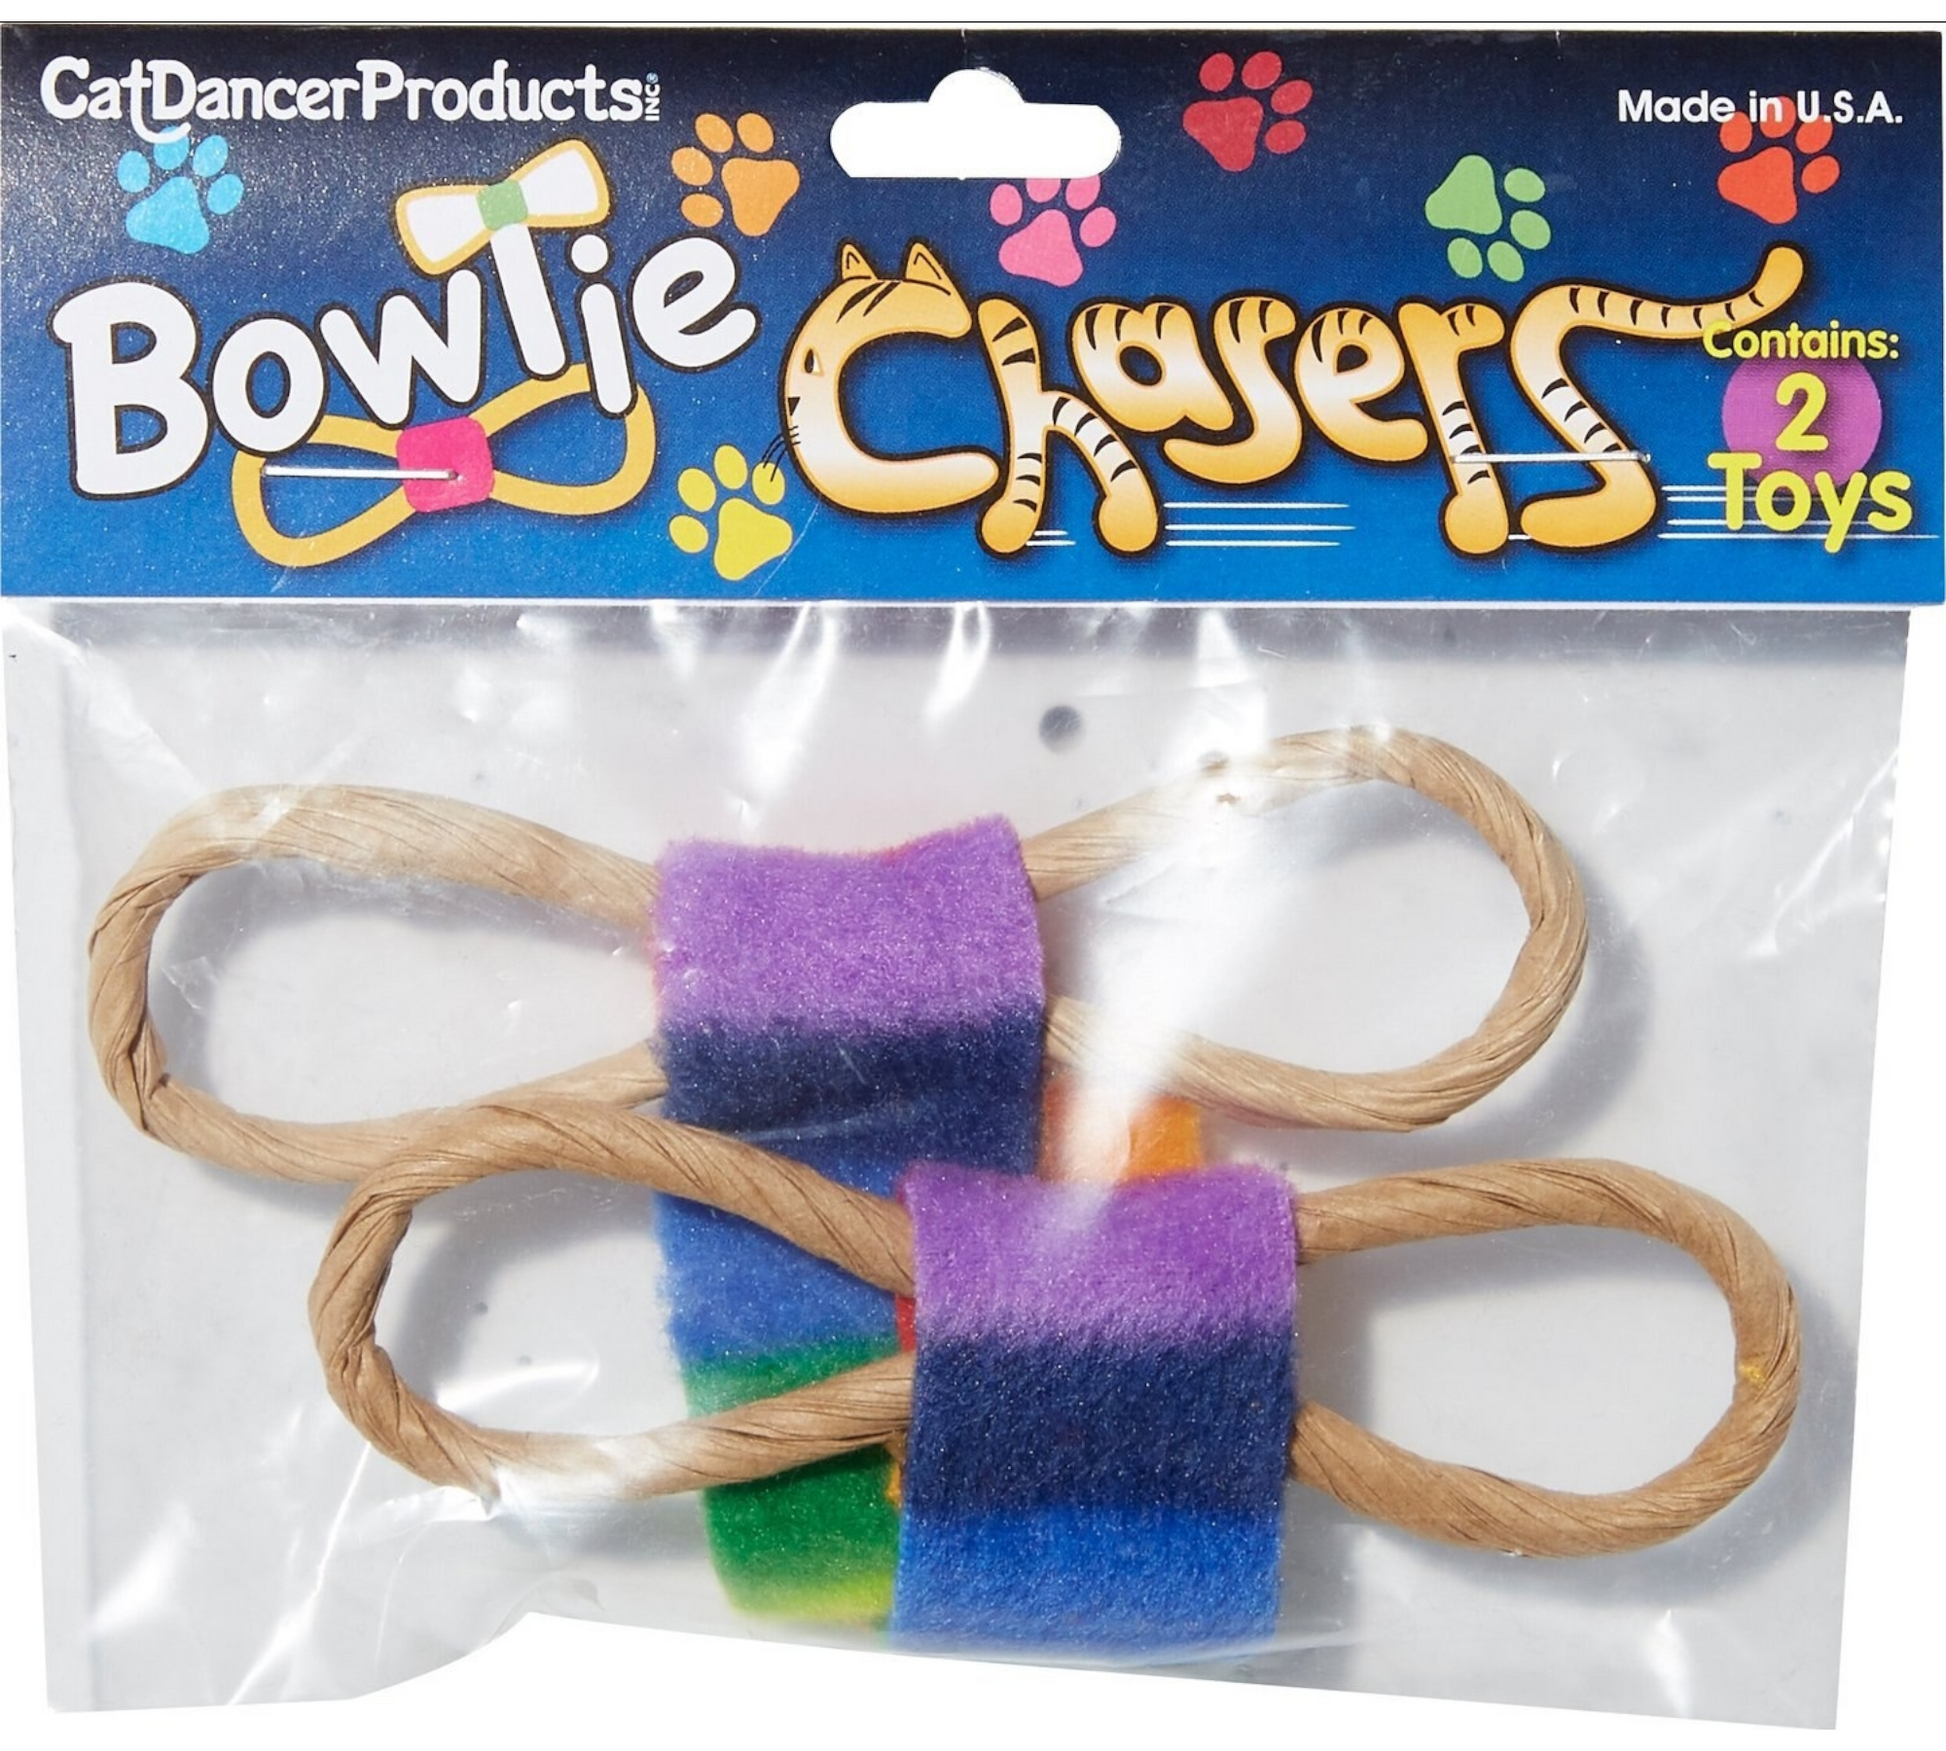 Canine's World Cat Balls & Chaser Toys Cat Dancer Bowtie Chasers Cat Toy, 2 count Cat Dancer